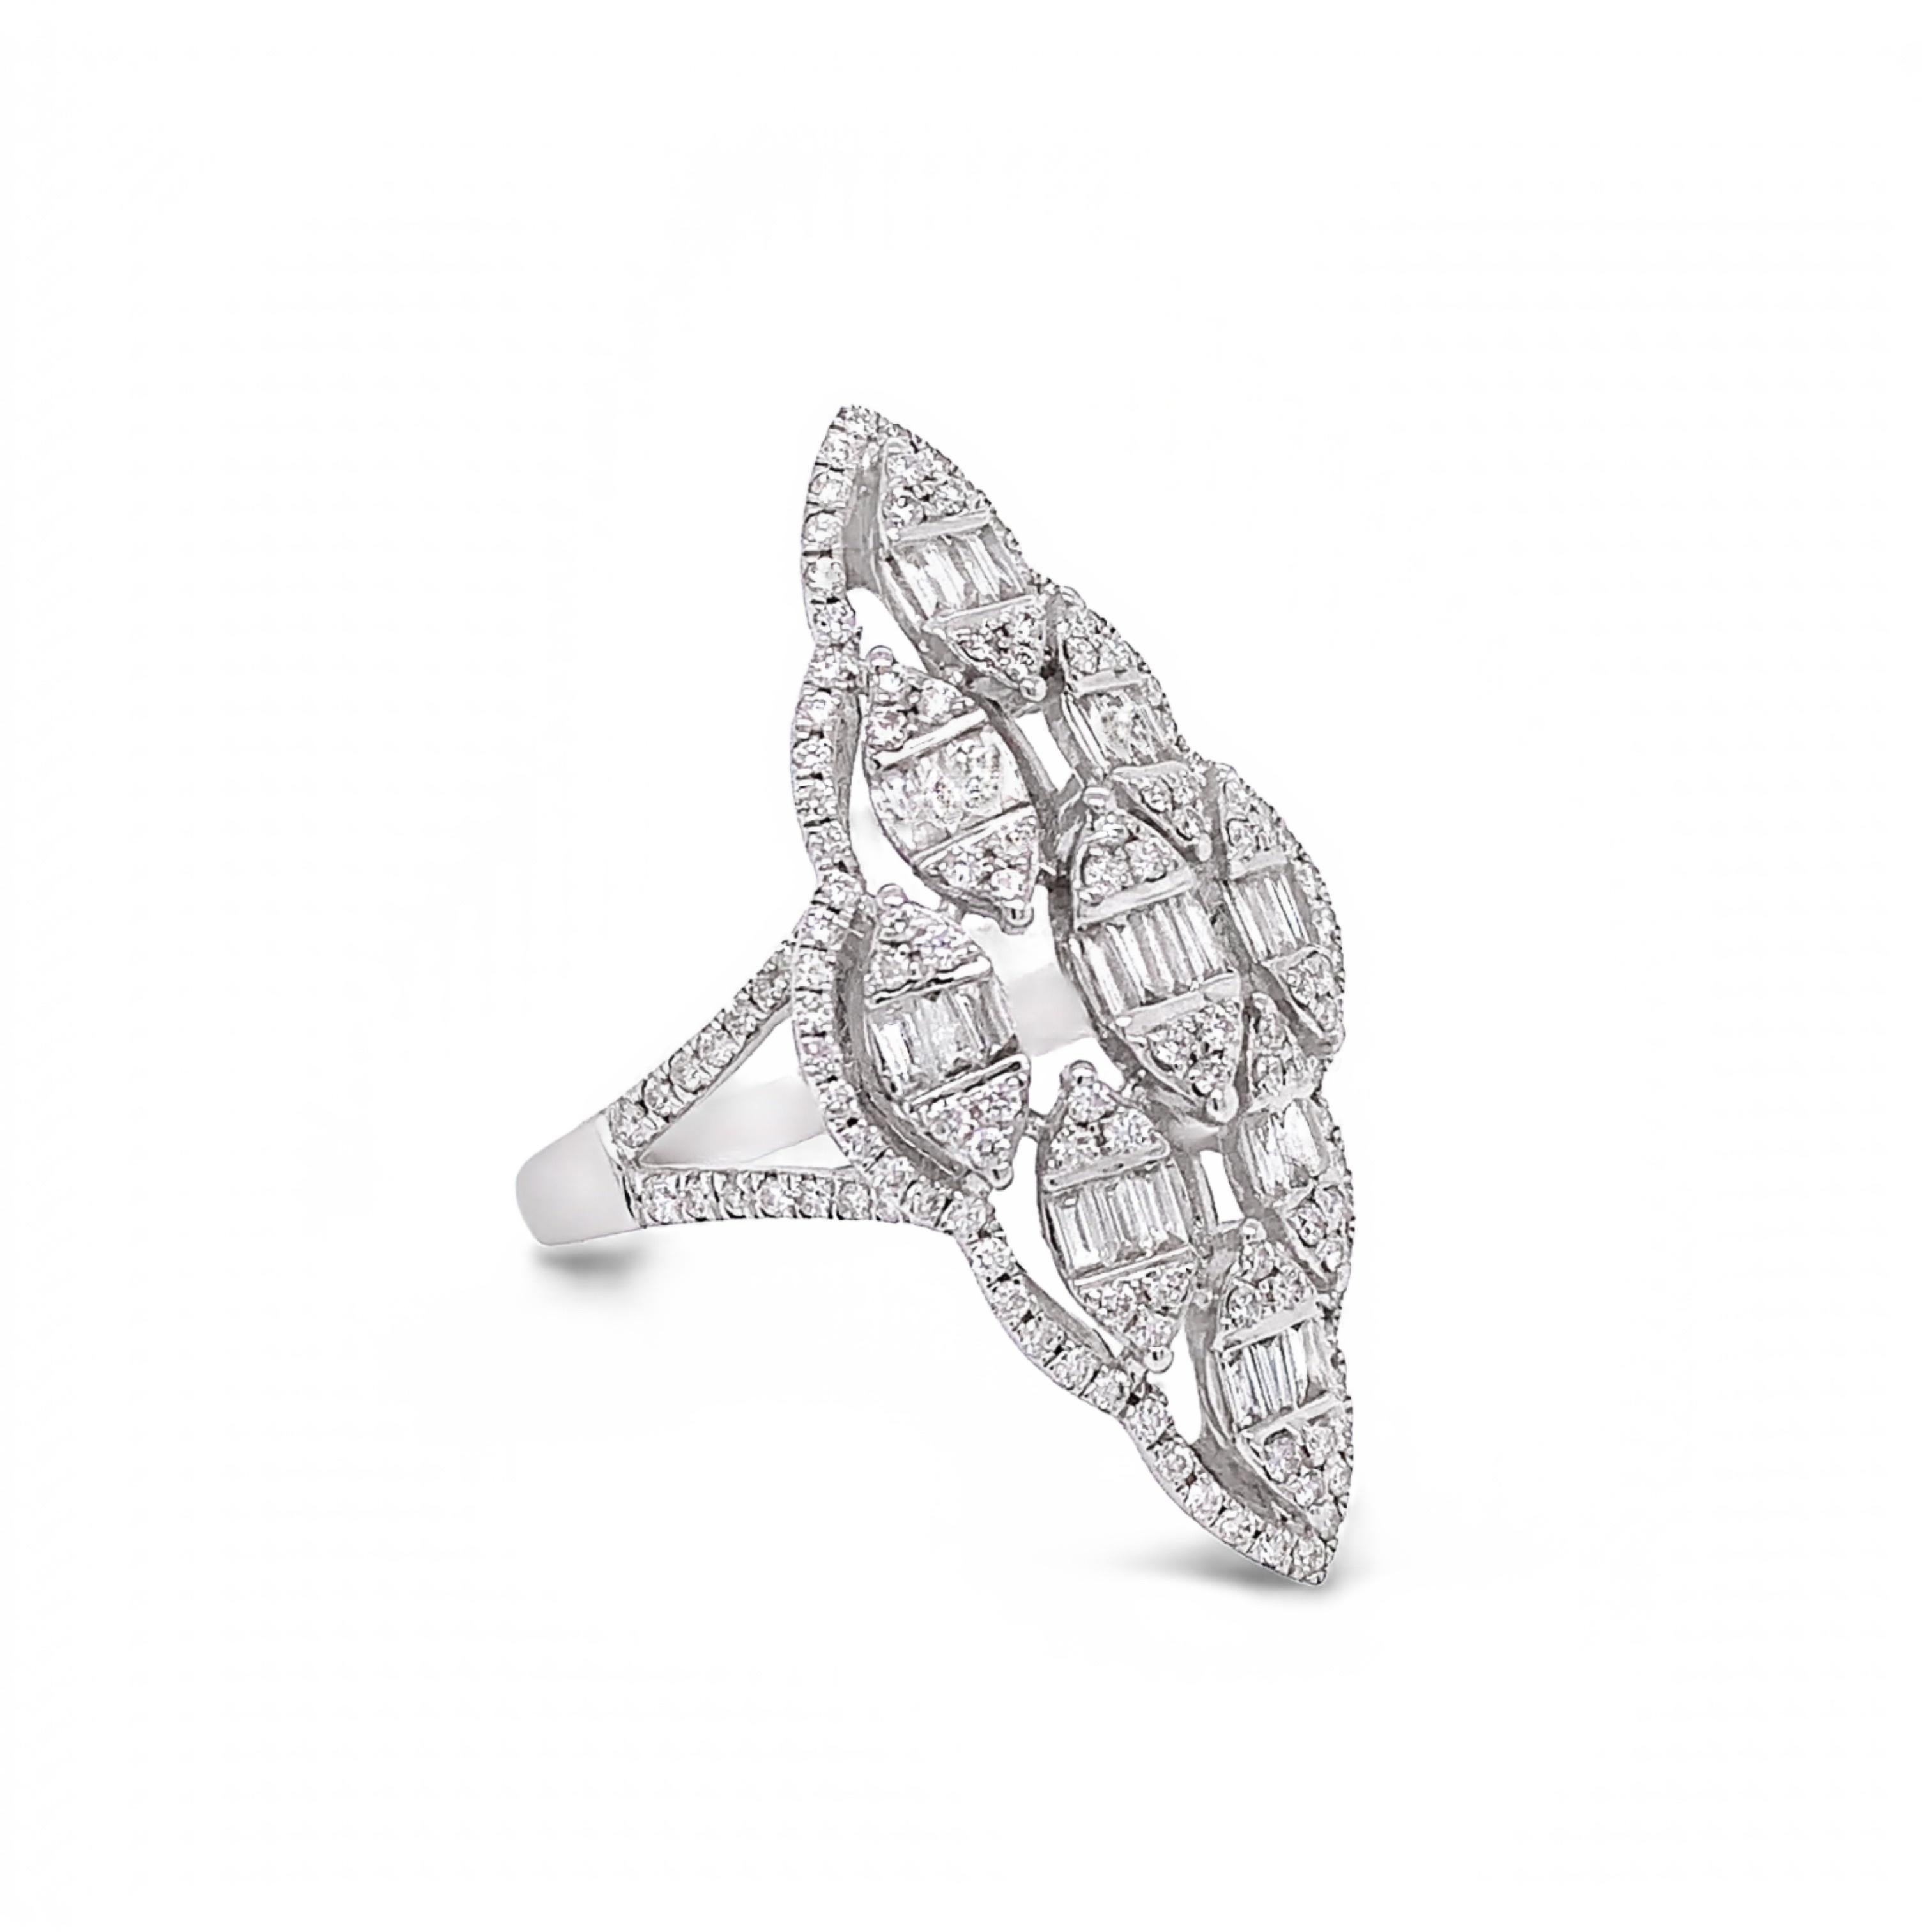 18K White Gold
Features 0.99 TW CT of Diamonds.